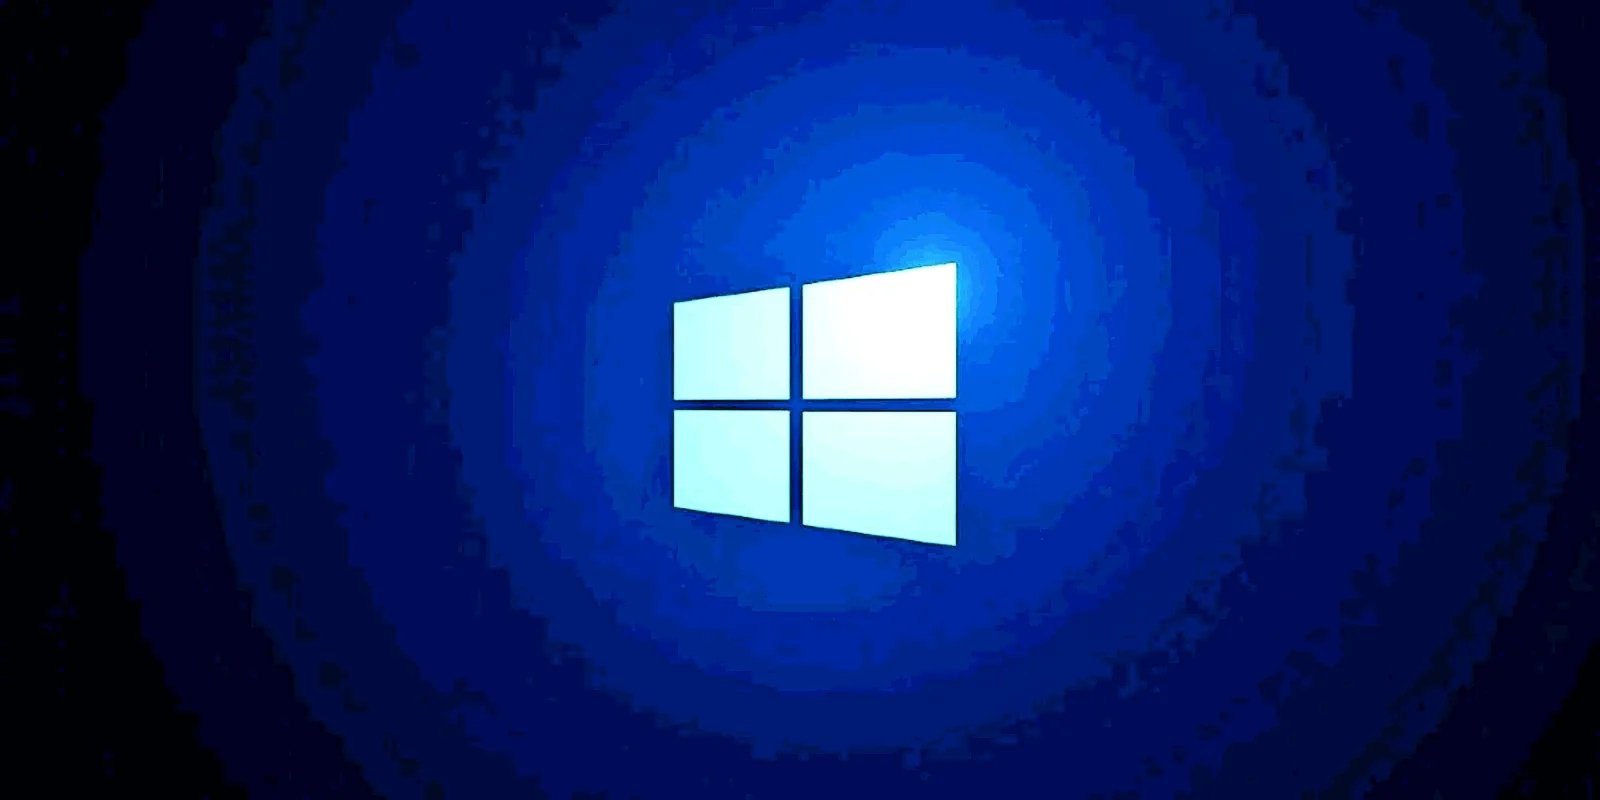 Home windows 10 20H2 for Enterprise reaches finish of service in Might